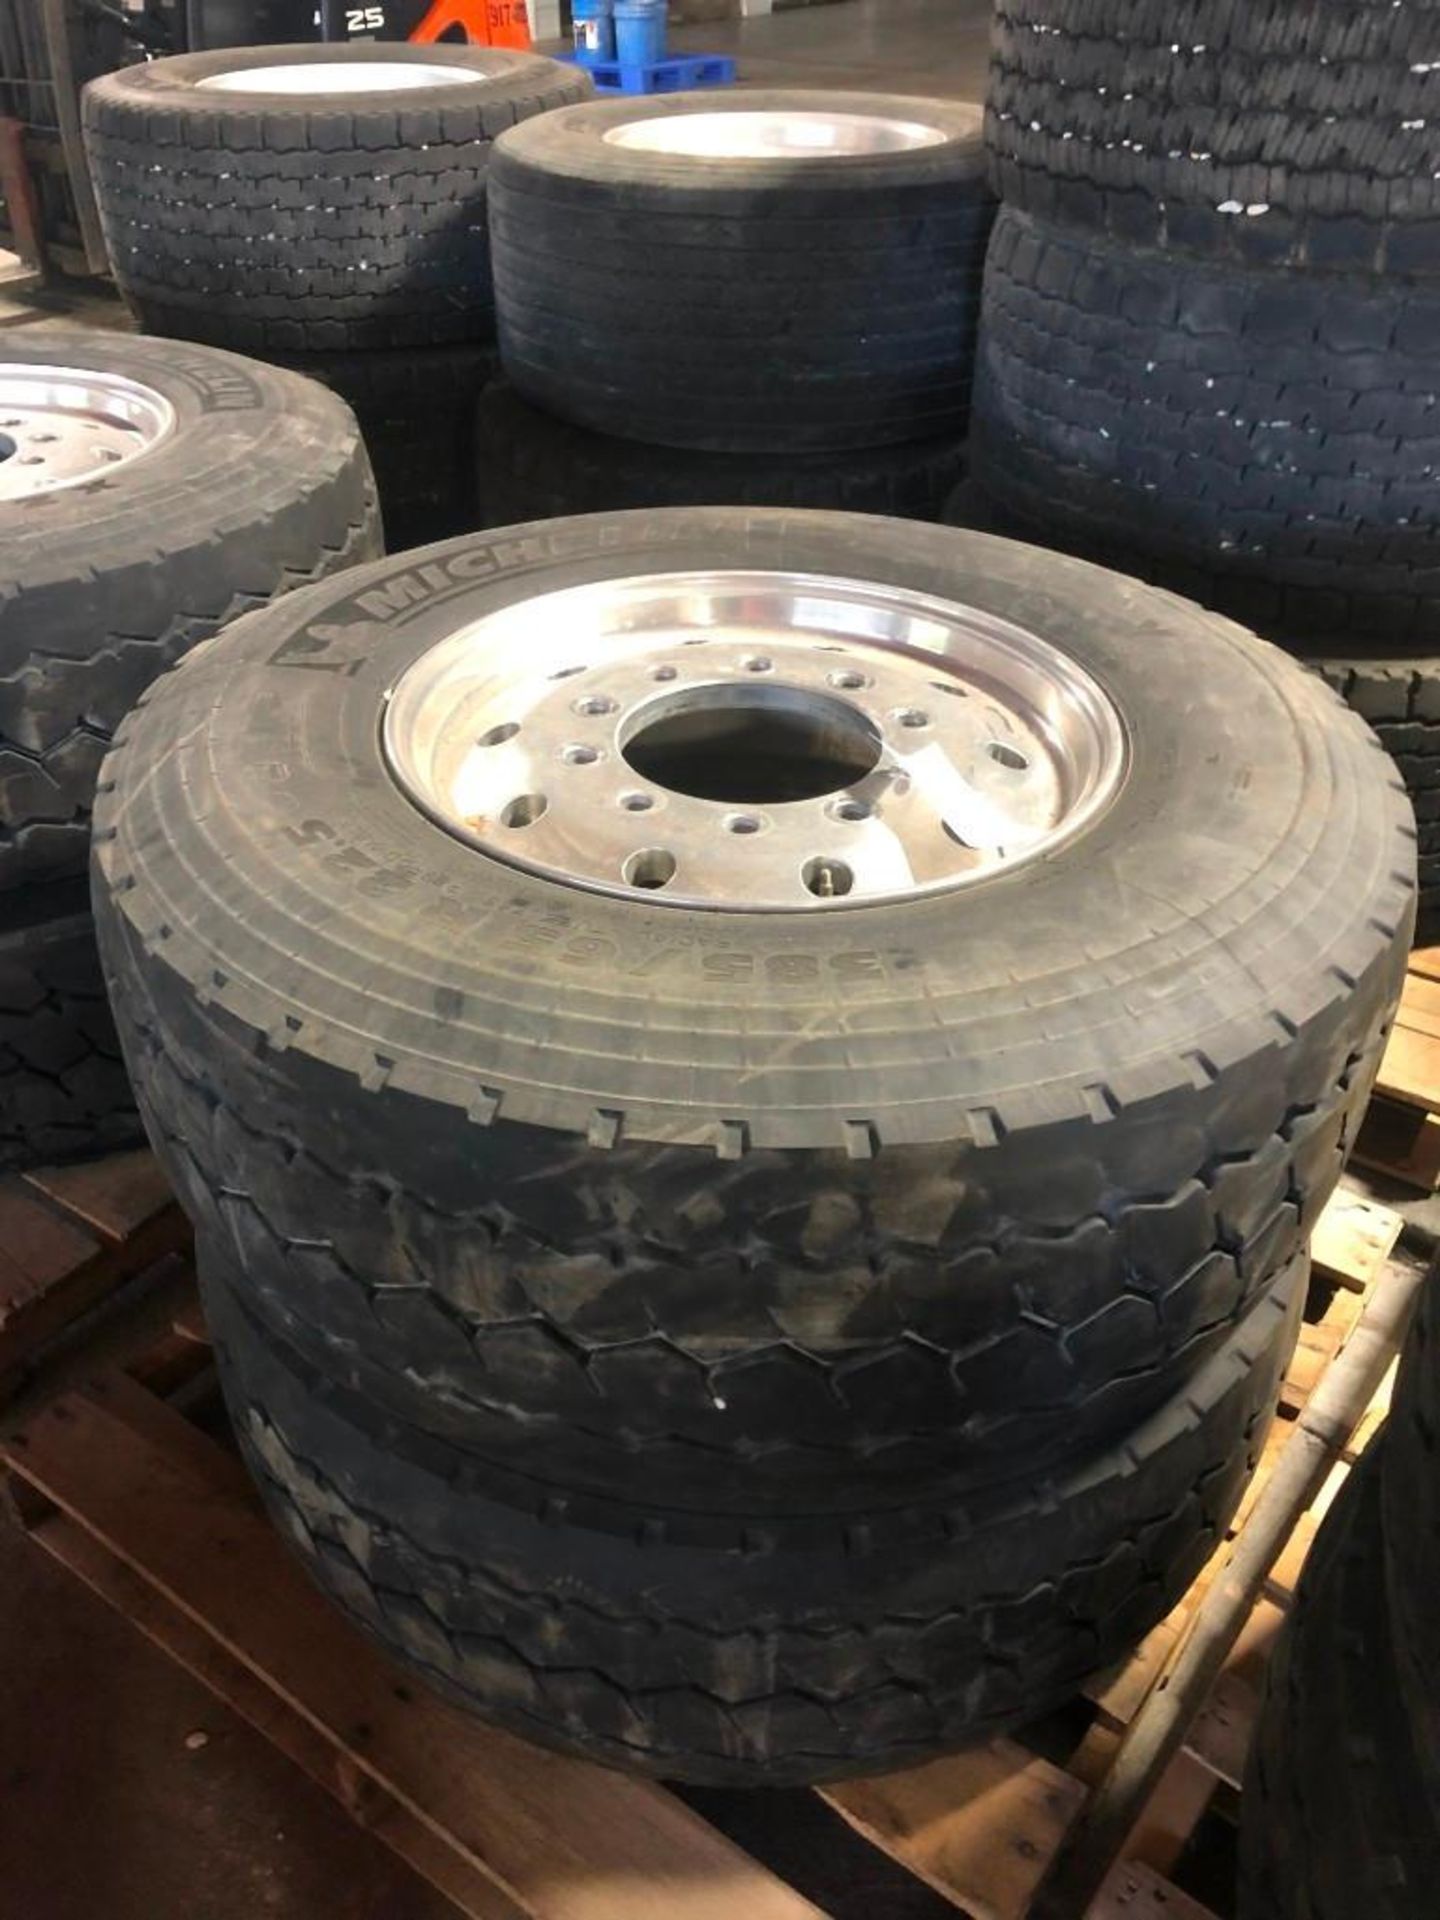 (2) Michelin 385/65R 22.5 Steer Tires with Rims. Located at 301 E Henry Street, Mt. Pleasant, IA